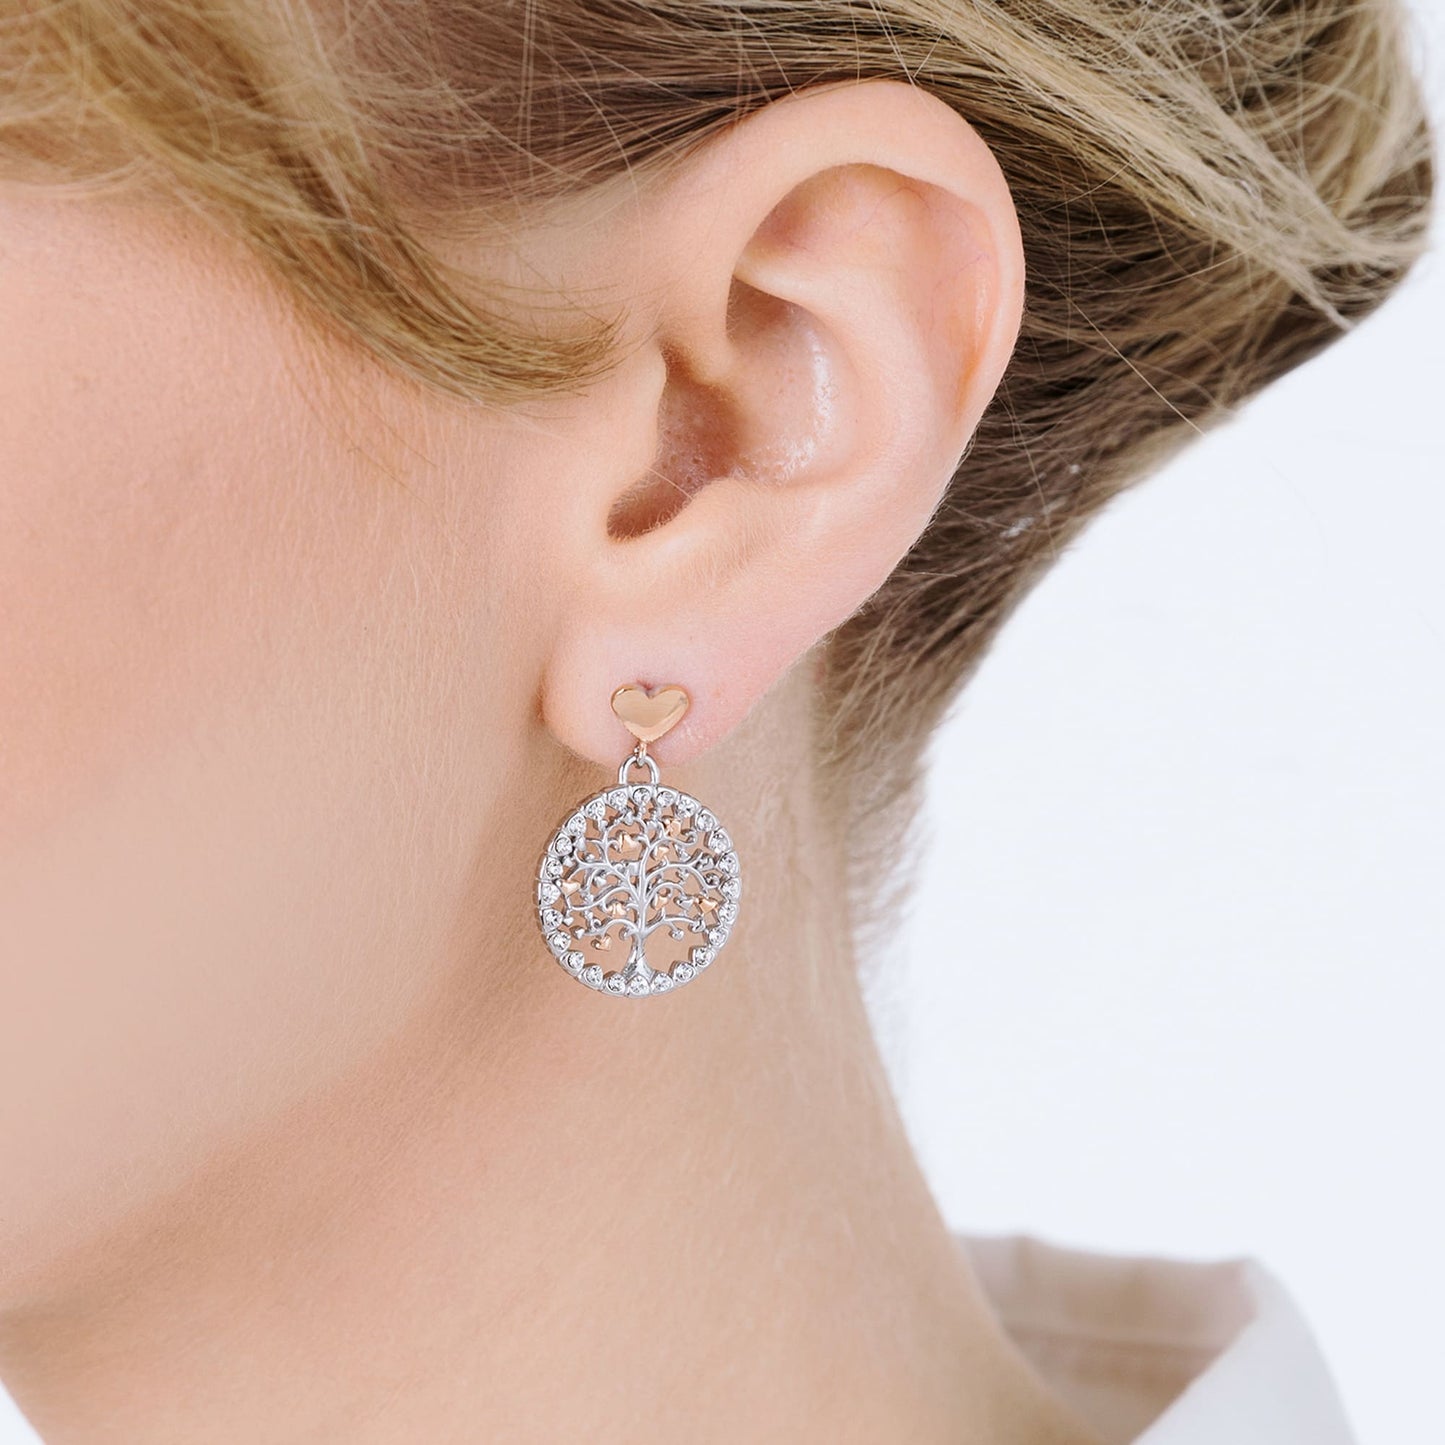 WOMEN'S STEEL TREE OF LIFE EARRINGS WITH WHITE CRYSTALS AND IP RO HEARTS